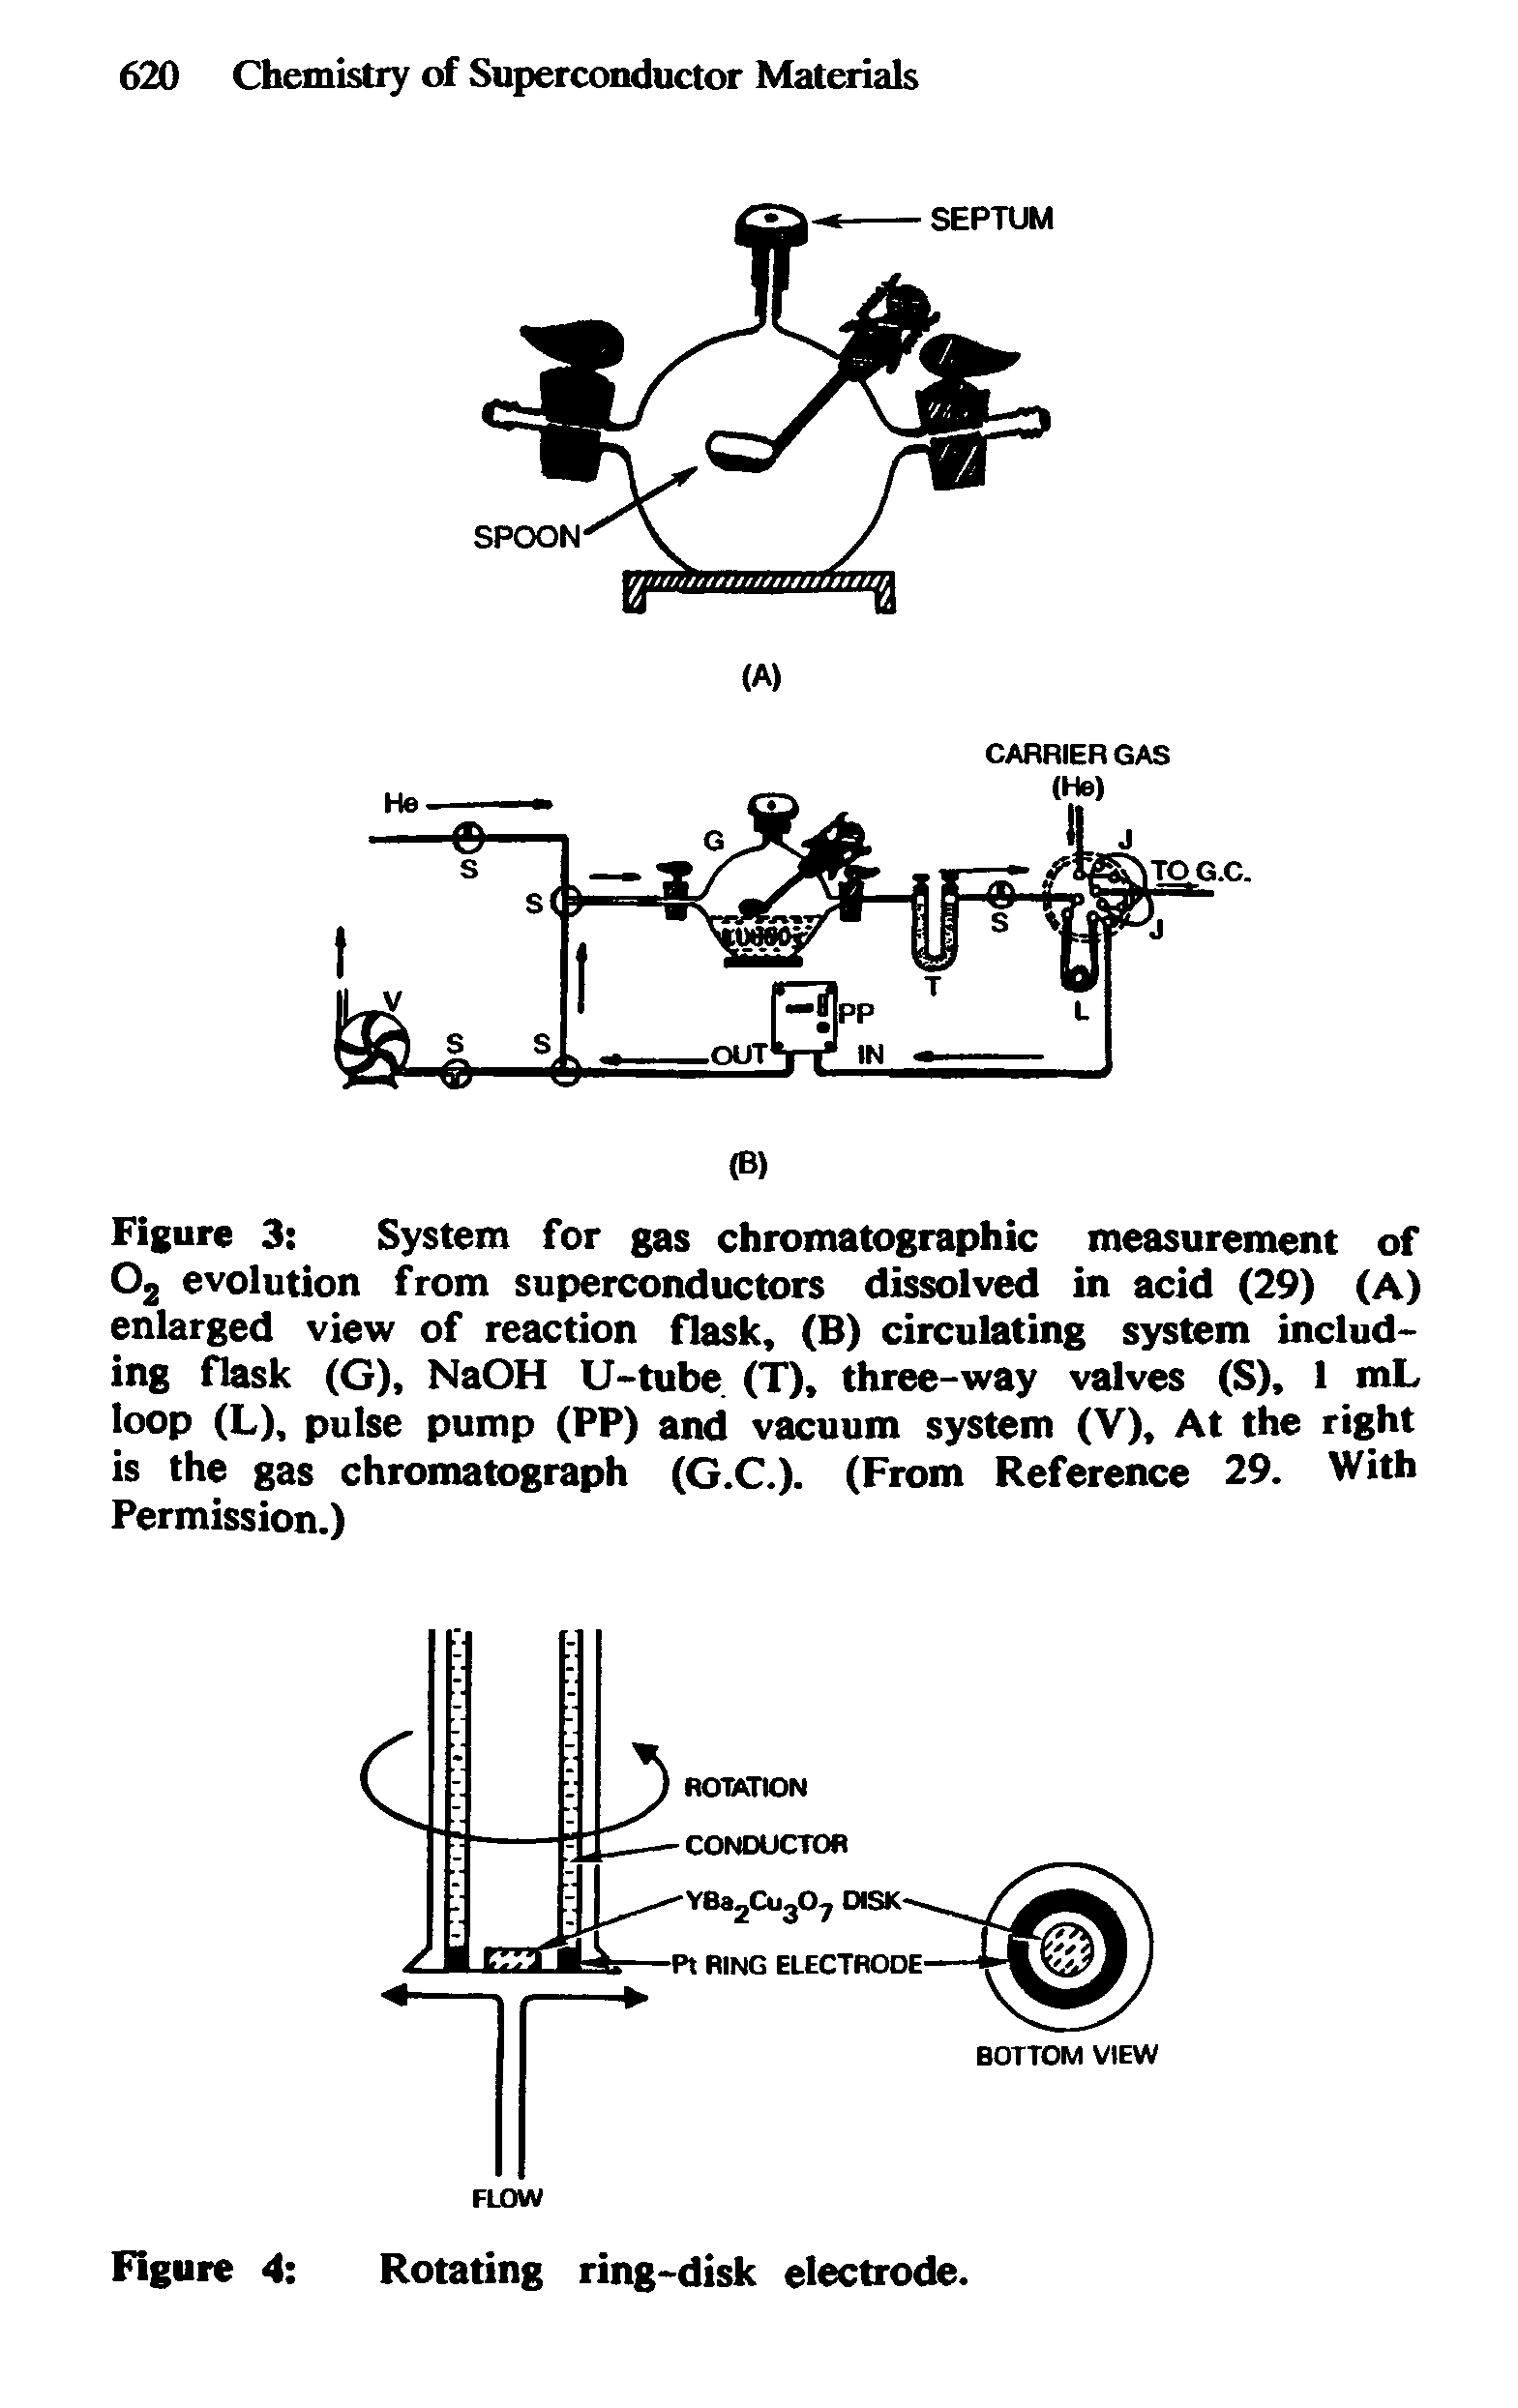 Figure 3 System for gas chromatographic measurement of Oz evolution from superconductors dissolved in acid (29) (A) enlarged view of reaction flask, (B) circulating system including flask (G), NaOH U-tube (T), three-way valves (S), 1 mL loop (L), pulse pump (PP) and vacuum system (V), At the right is the gas chromatograph (G.C.). (From Reference 29. With Permission.)...